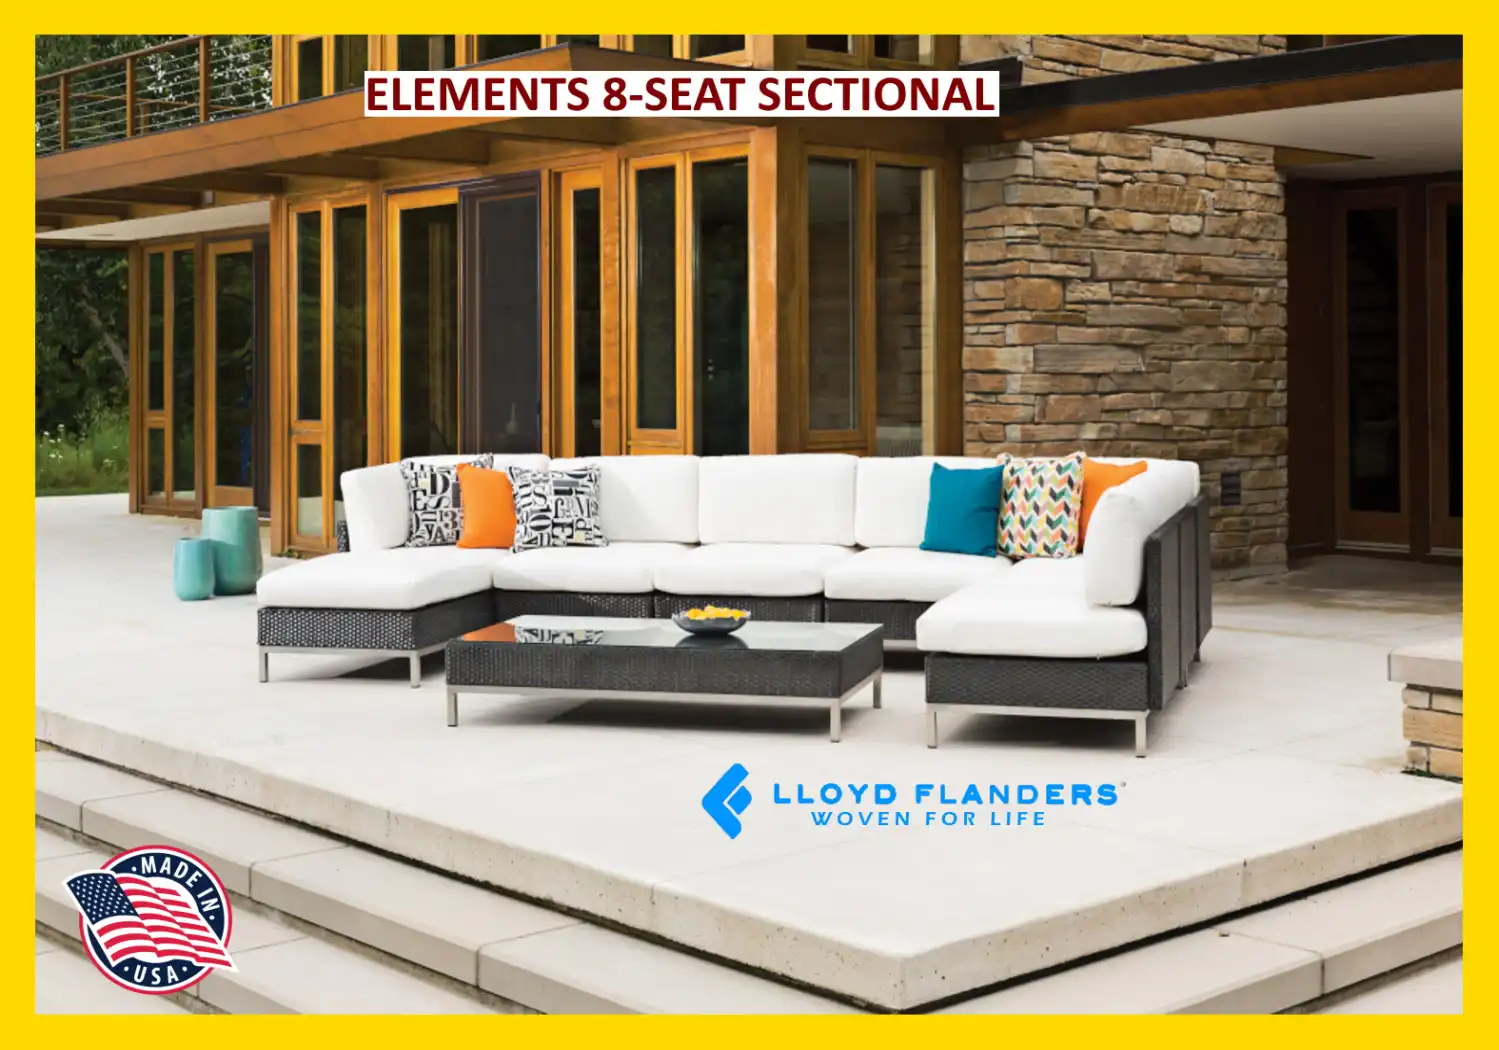 ELEMENTS 8-SEAT SECTIONAL